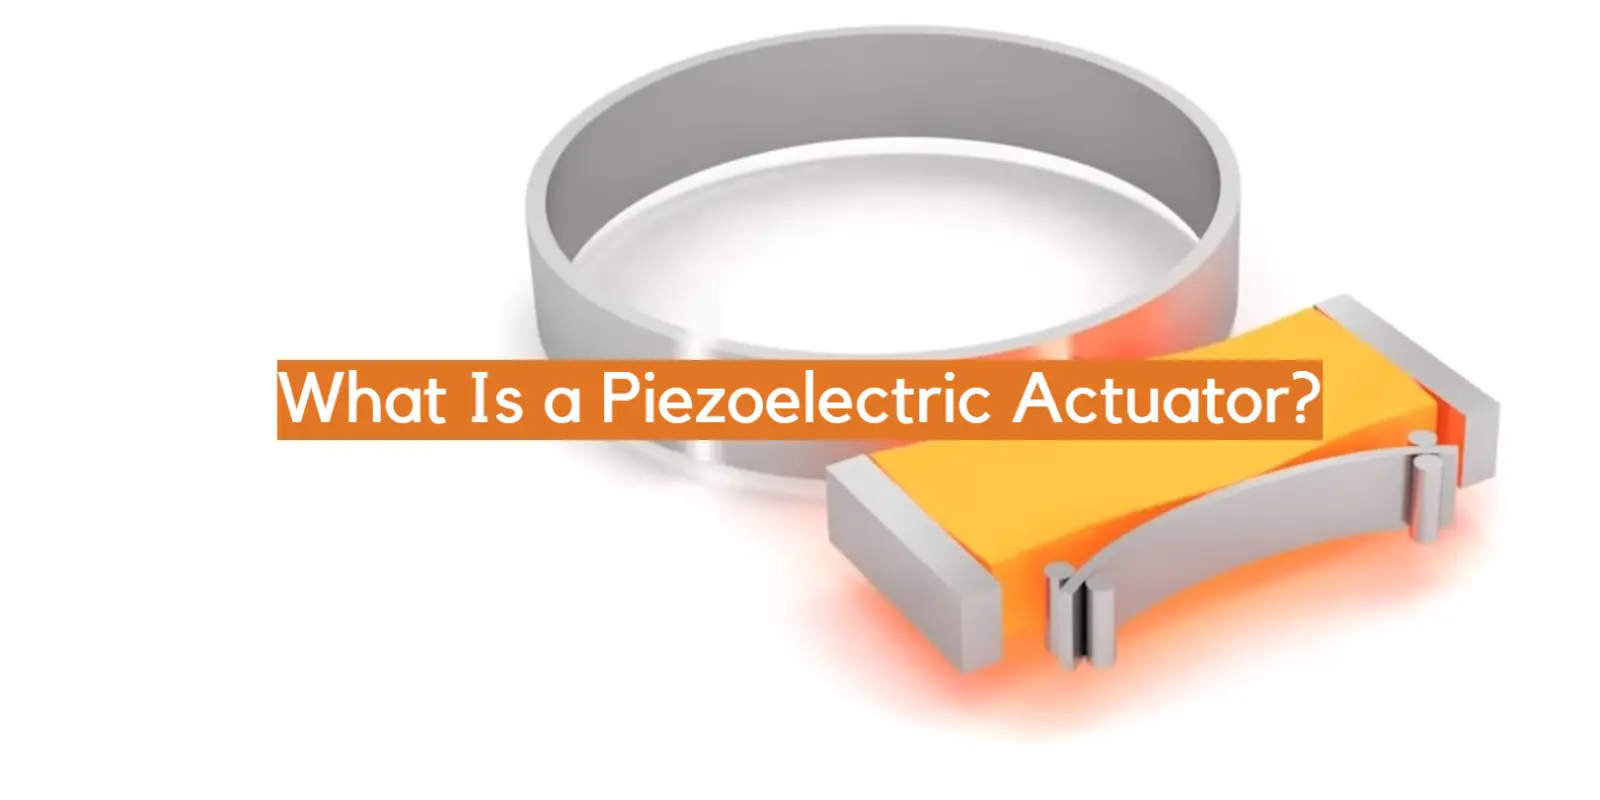 What Is a Piezoelectric Actuator?